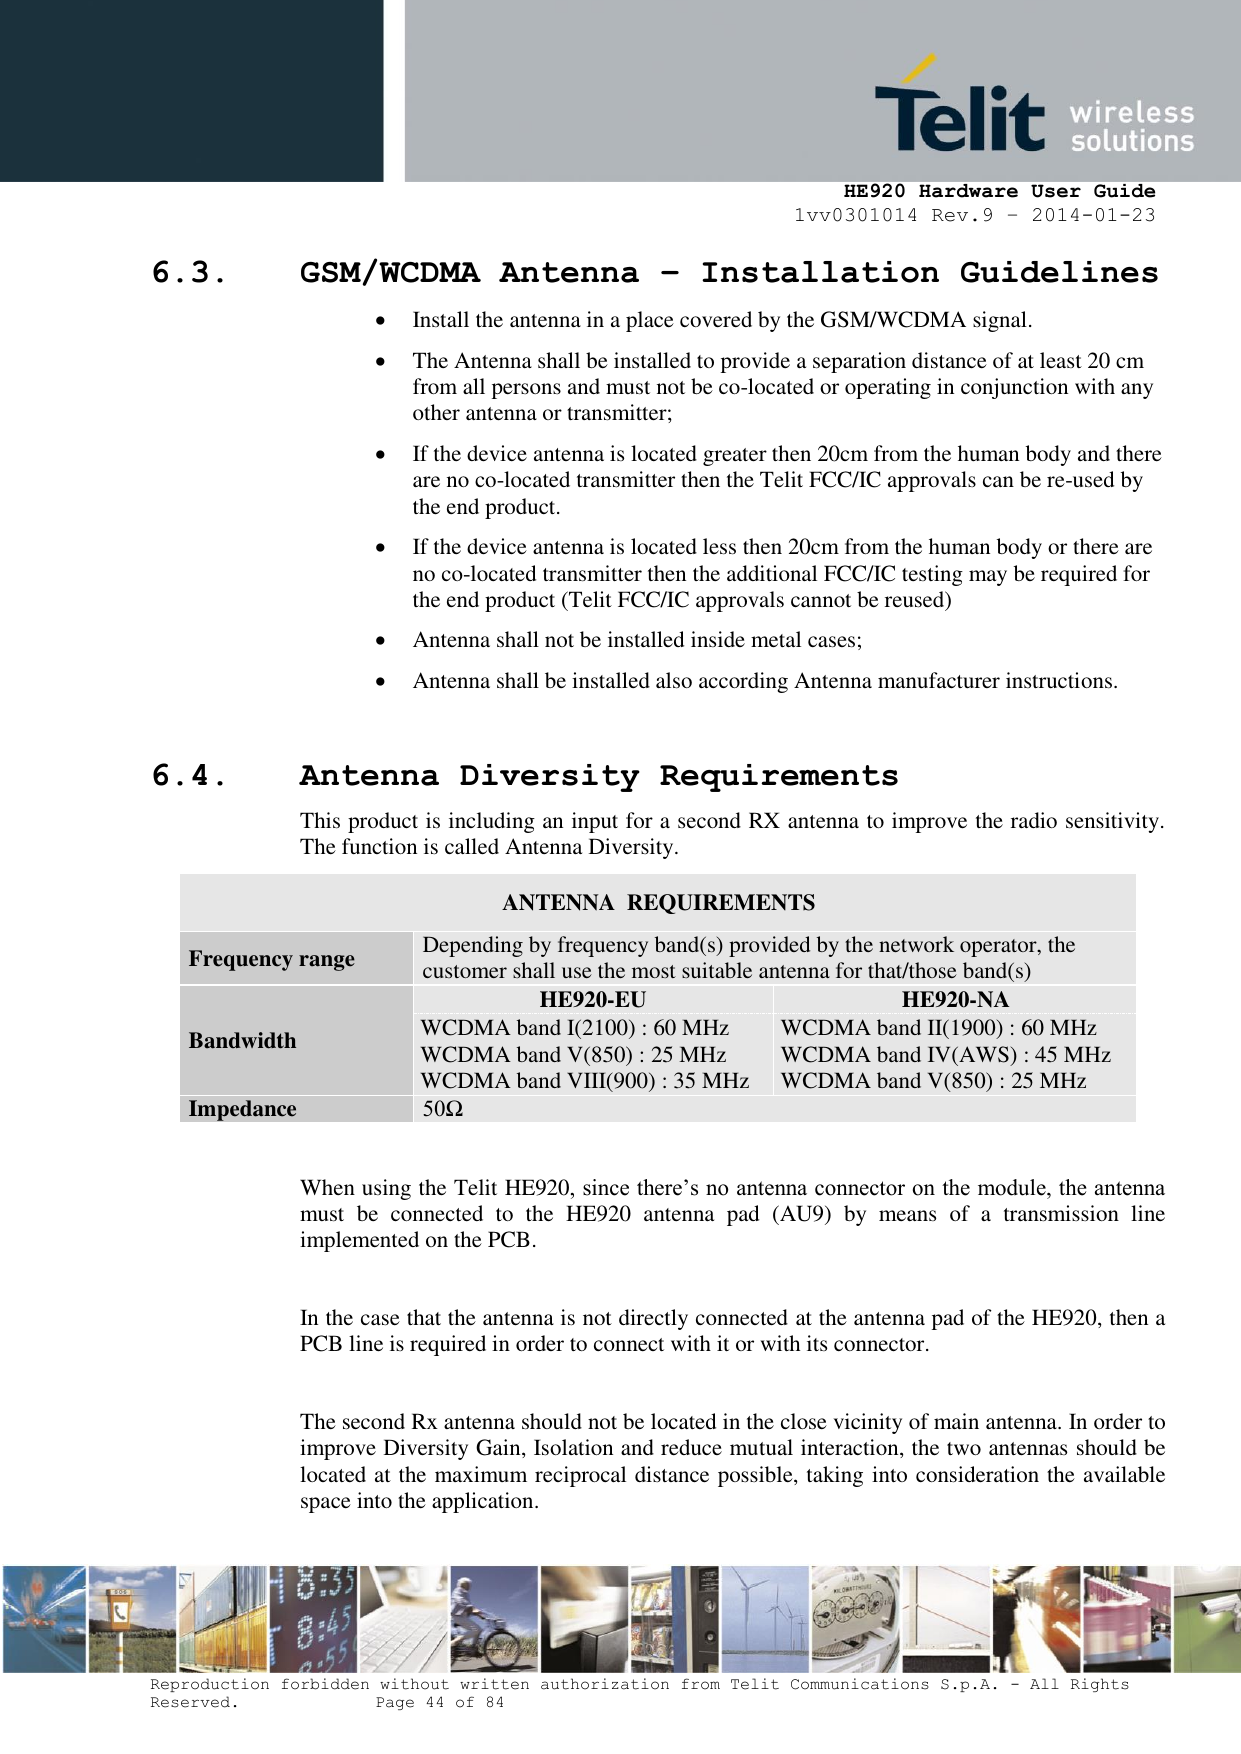     HE920 Hardware User Guide 1vv0301014 Rev.9 – 2014-01-23 Reproduction forbidden without written authorization from Telit Communications S.p.A. - All Rights Reserved.    Page 44 of 84  6.3. GSM/WCDMA Antenna – Installation Guidelines  Install the antenna in a place covered by the GSM/WCDMA signal.  The Antenna shall be installed to provide a separation distance of at least 20 cm from all persons and must not be co-located or operating in conjunction with any other antenna or transmitter;  If the device antenna is located greater then 20cm from the human body and there are no co-located transmitter then the Telit FCC/IC approvals can be re-used by the end product.  If the device antenna is located less then 20cm from the human body or there are no co-located transmitter then the additional FCC/IC testing may be required for the end product (Telit FCC/IC approvals cannot be reused)   Antenna shall not be installed inside metal cases;   Antenna shall be installed also according Antenna manufacturer instructions.  6.4. Antenna Diversity Requirements This product is including an input for a second RX antenna to improve the radio sensitivity. The function is called Antenna Diversity. ANTENNA  REQUIREMENTS Frequency range Depending by frequency band(s) provided by the network operator, the customer shall use the most suitable antenna for that/those band(s) Bandwidth HE920-EU HE920-NA WCDMA band I(2100) : 60 MHz WCDMA band V(850) : 25 MHz WCDMA band VIII(900) : 35 MHz WCDMA band II(1900) : 60 MHz WCDMA band IV(AWS) : 45 MHz WCDMA band V(850) : 25 MHz Impedance 50Ω  When using the Telit HE920, since there’s no antenna connector on the module, the antenna must  be  connected  to  the  HE920  antenna  pad  (AU9)  by  means  of  a  transmission  line implemented on the PCB.  In the case that the antenna is not directly connected at the antenna pad of the HE920, then a PCB line is required in order to connect with it or with its connector.  The second Rx antenna should not be located in the close vicinity of main antenna. In order to improve Diversity Gain, Isolation and reduce mutual interaction, the two antennas should be located at the maximum reciprocal distance possible, taking into consideration the available space into the application.  